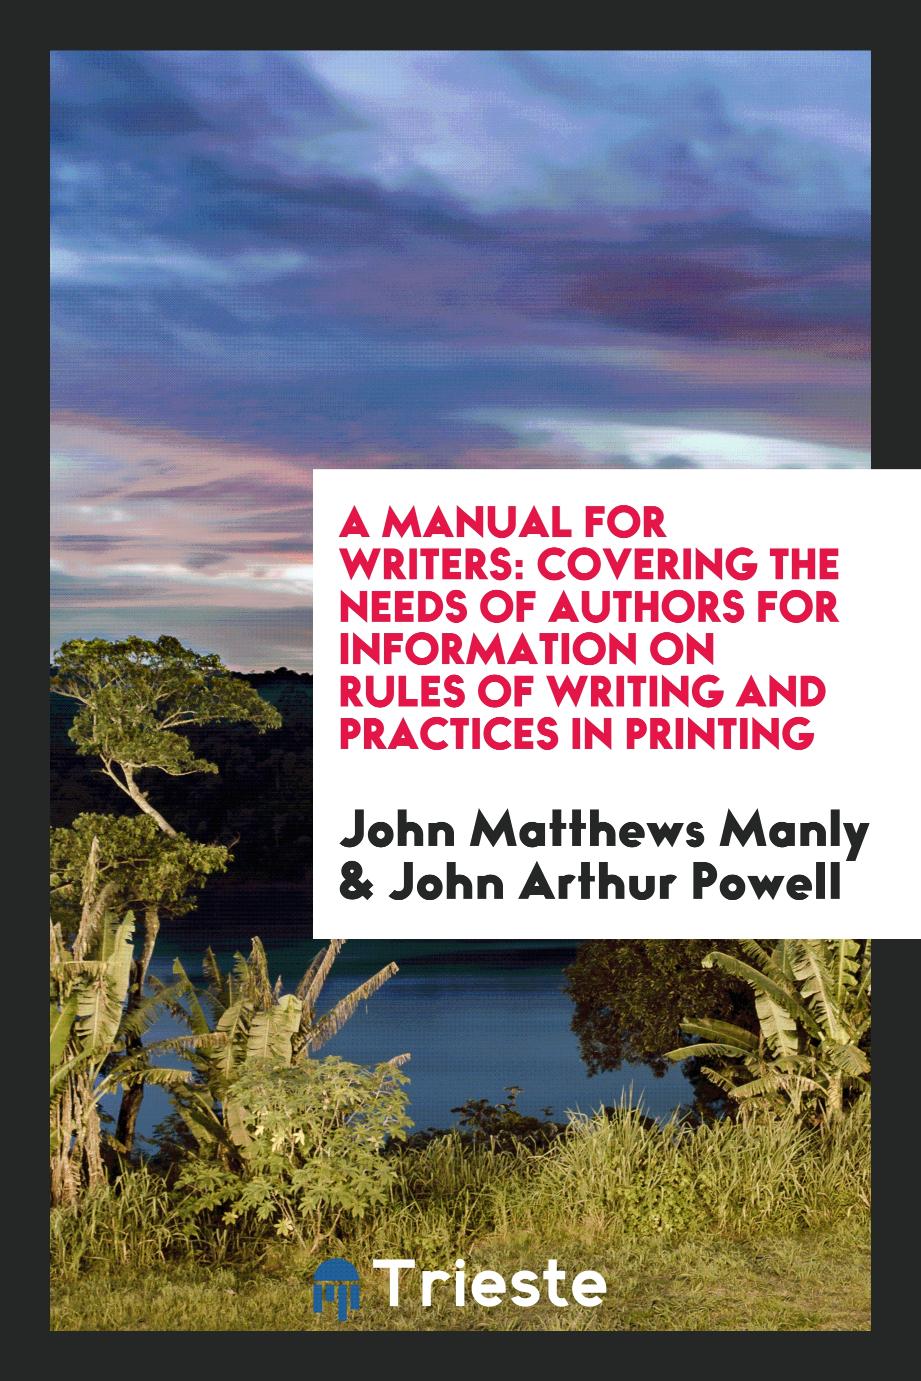 A Manual for Writers: Covering the Needs of Authors for Information on Rules of Writing and Practices in Printing